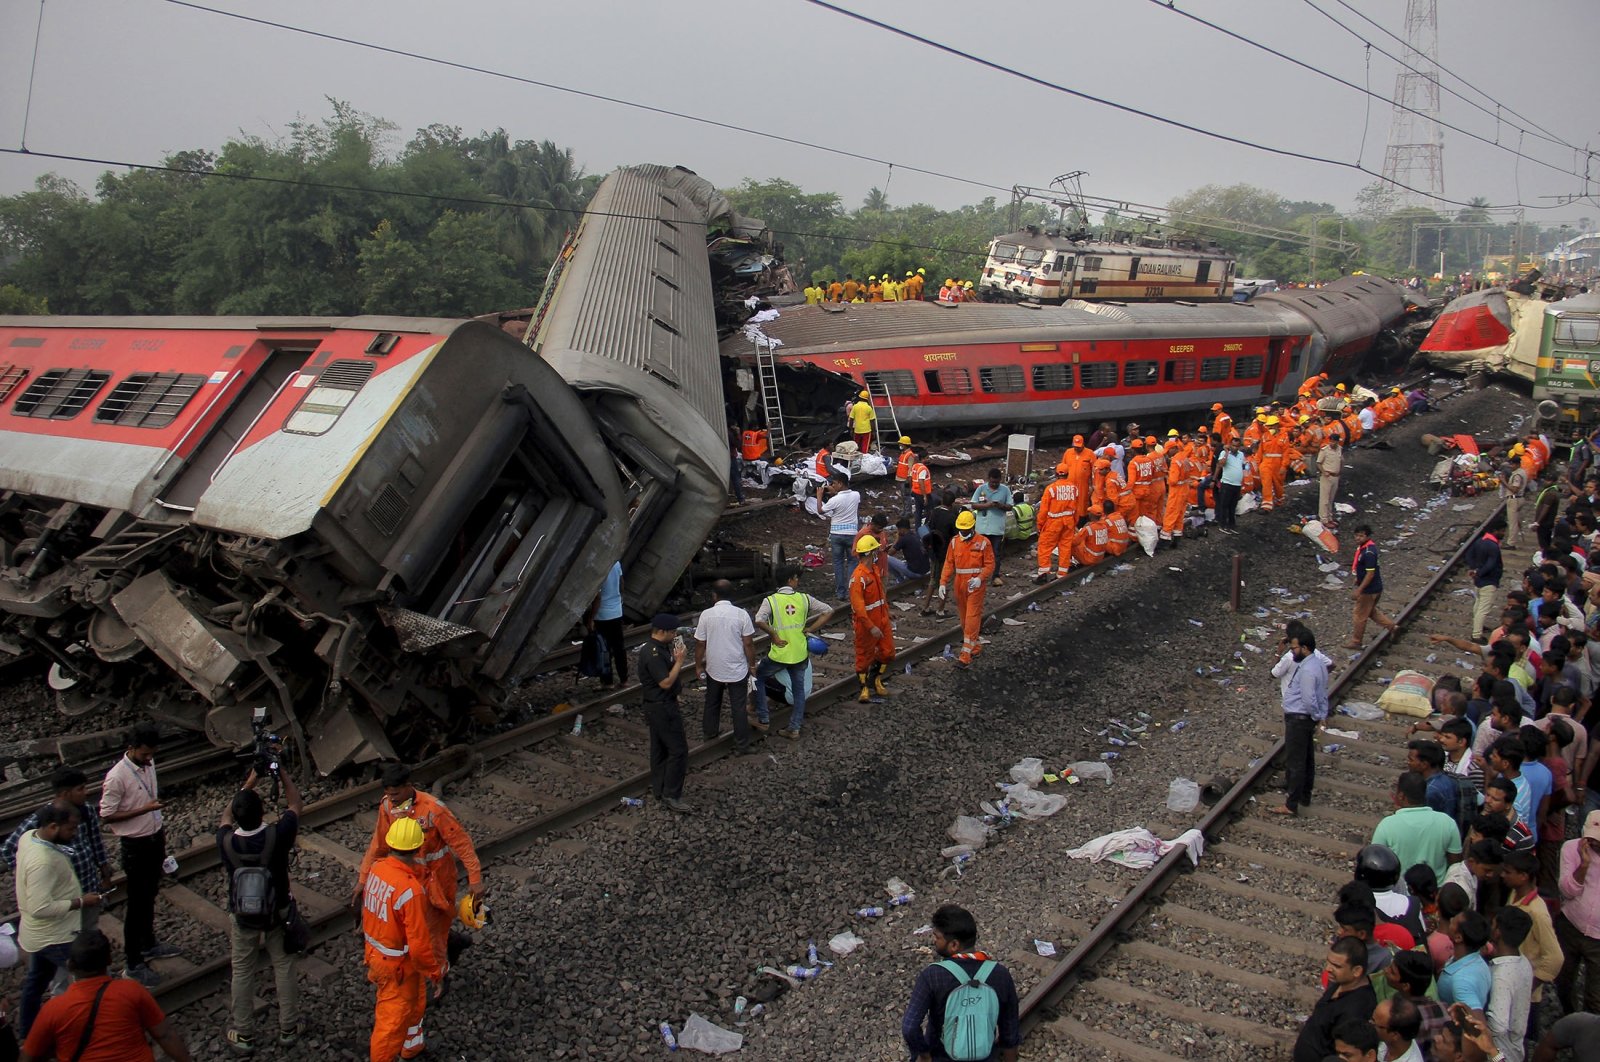 Train crash in India leaves over 280 dead, 900 injured